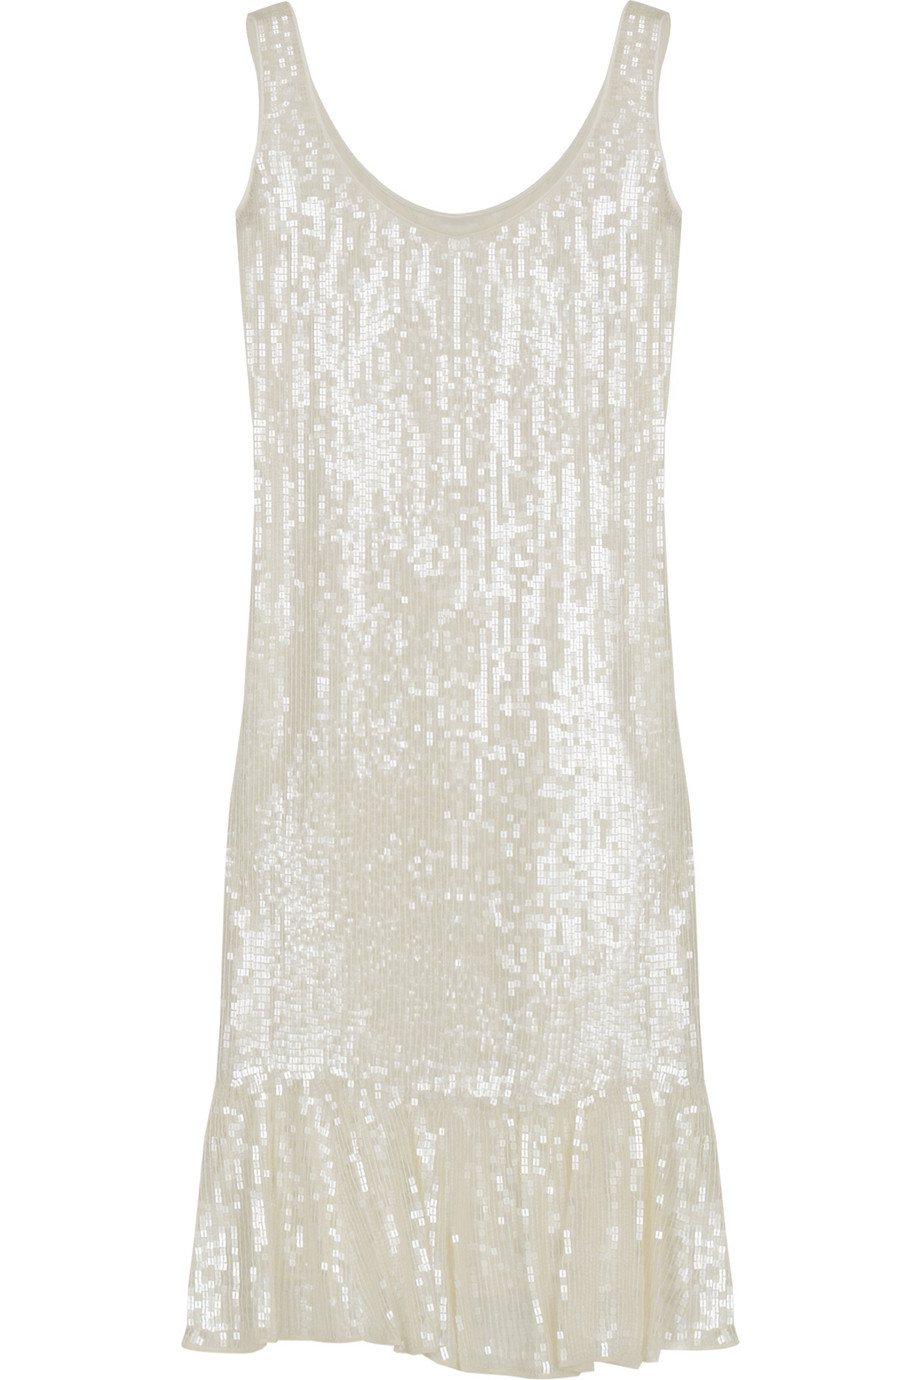 White Sequined Dress